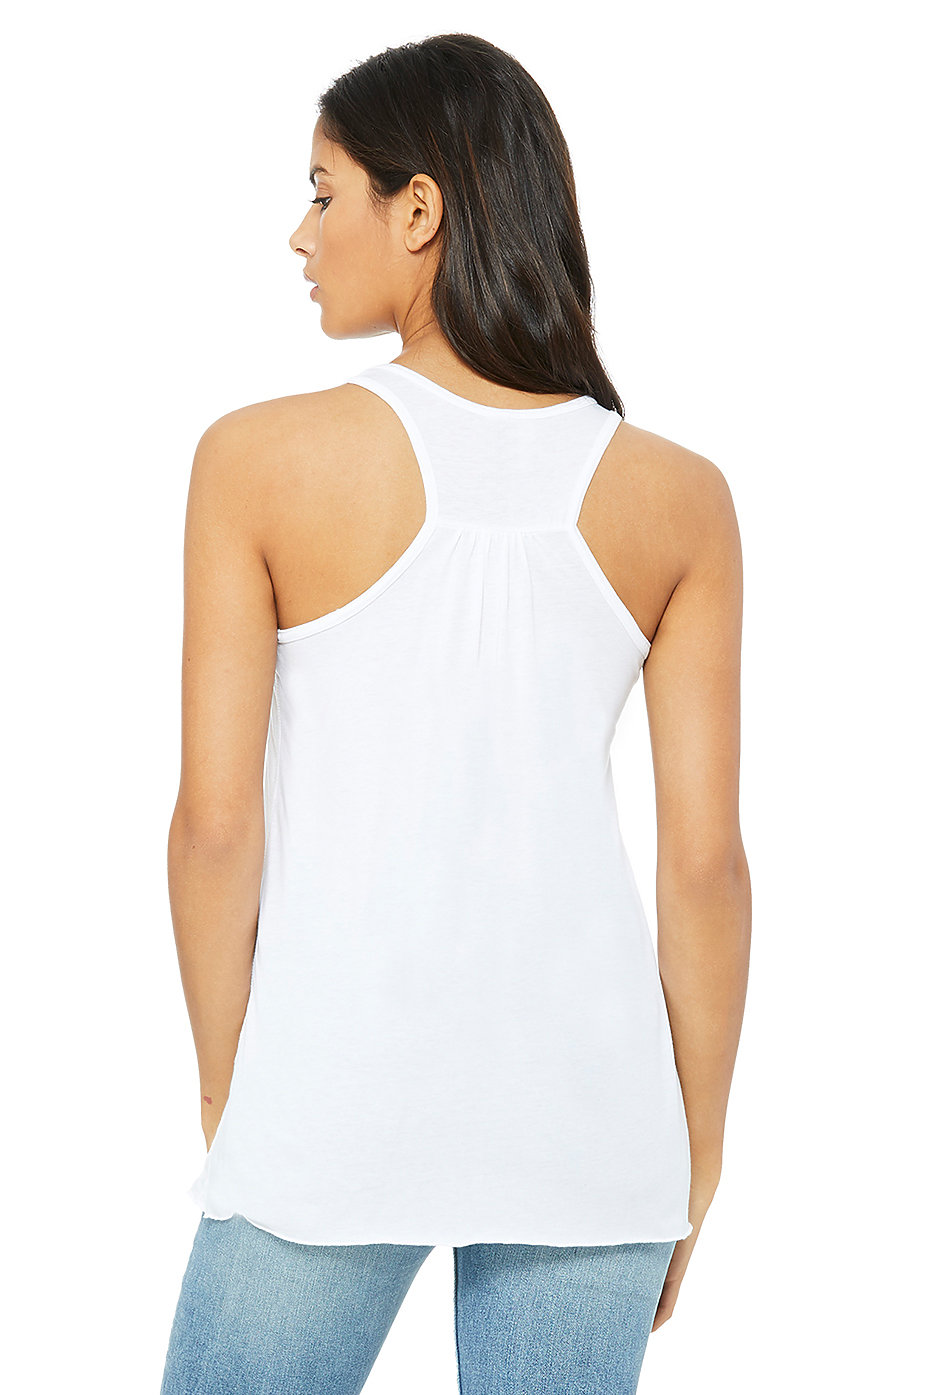 L And XL Sports Racerback Tank Top at Rs 300/piece in Coimbatore